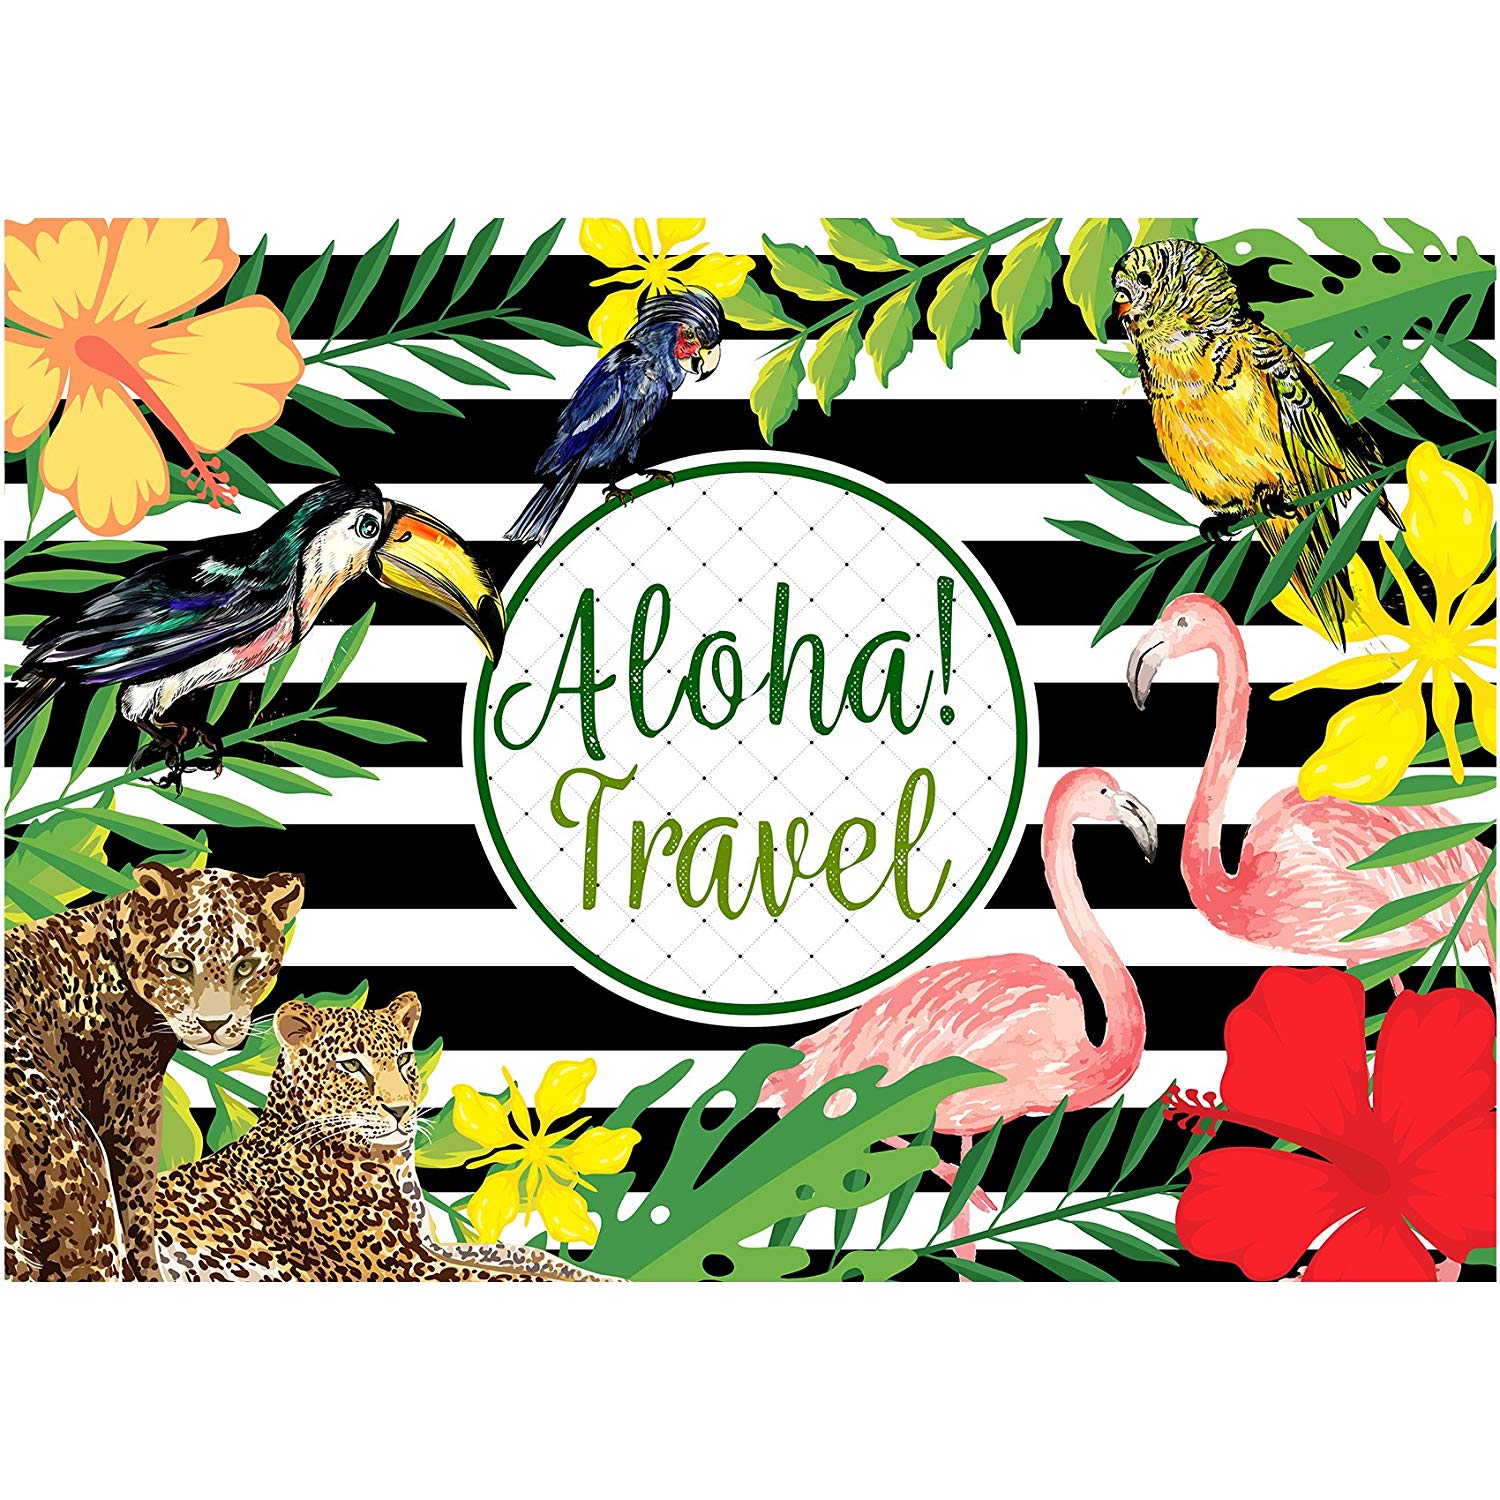 Aloha Travel Tropical Forest Luau Party Backdrop Dessert Table Photography Background 7x5 feet